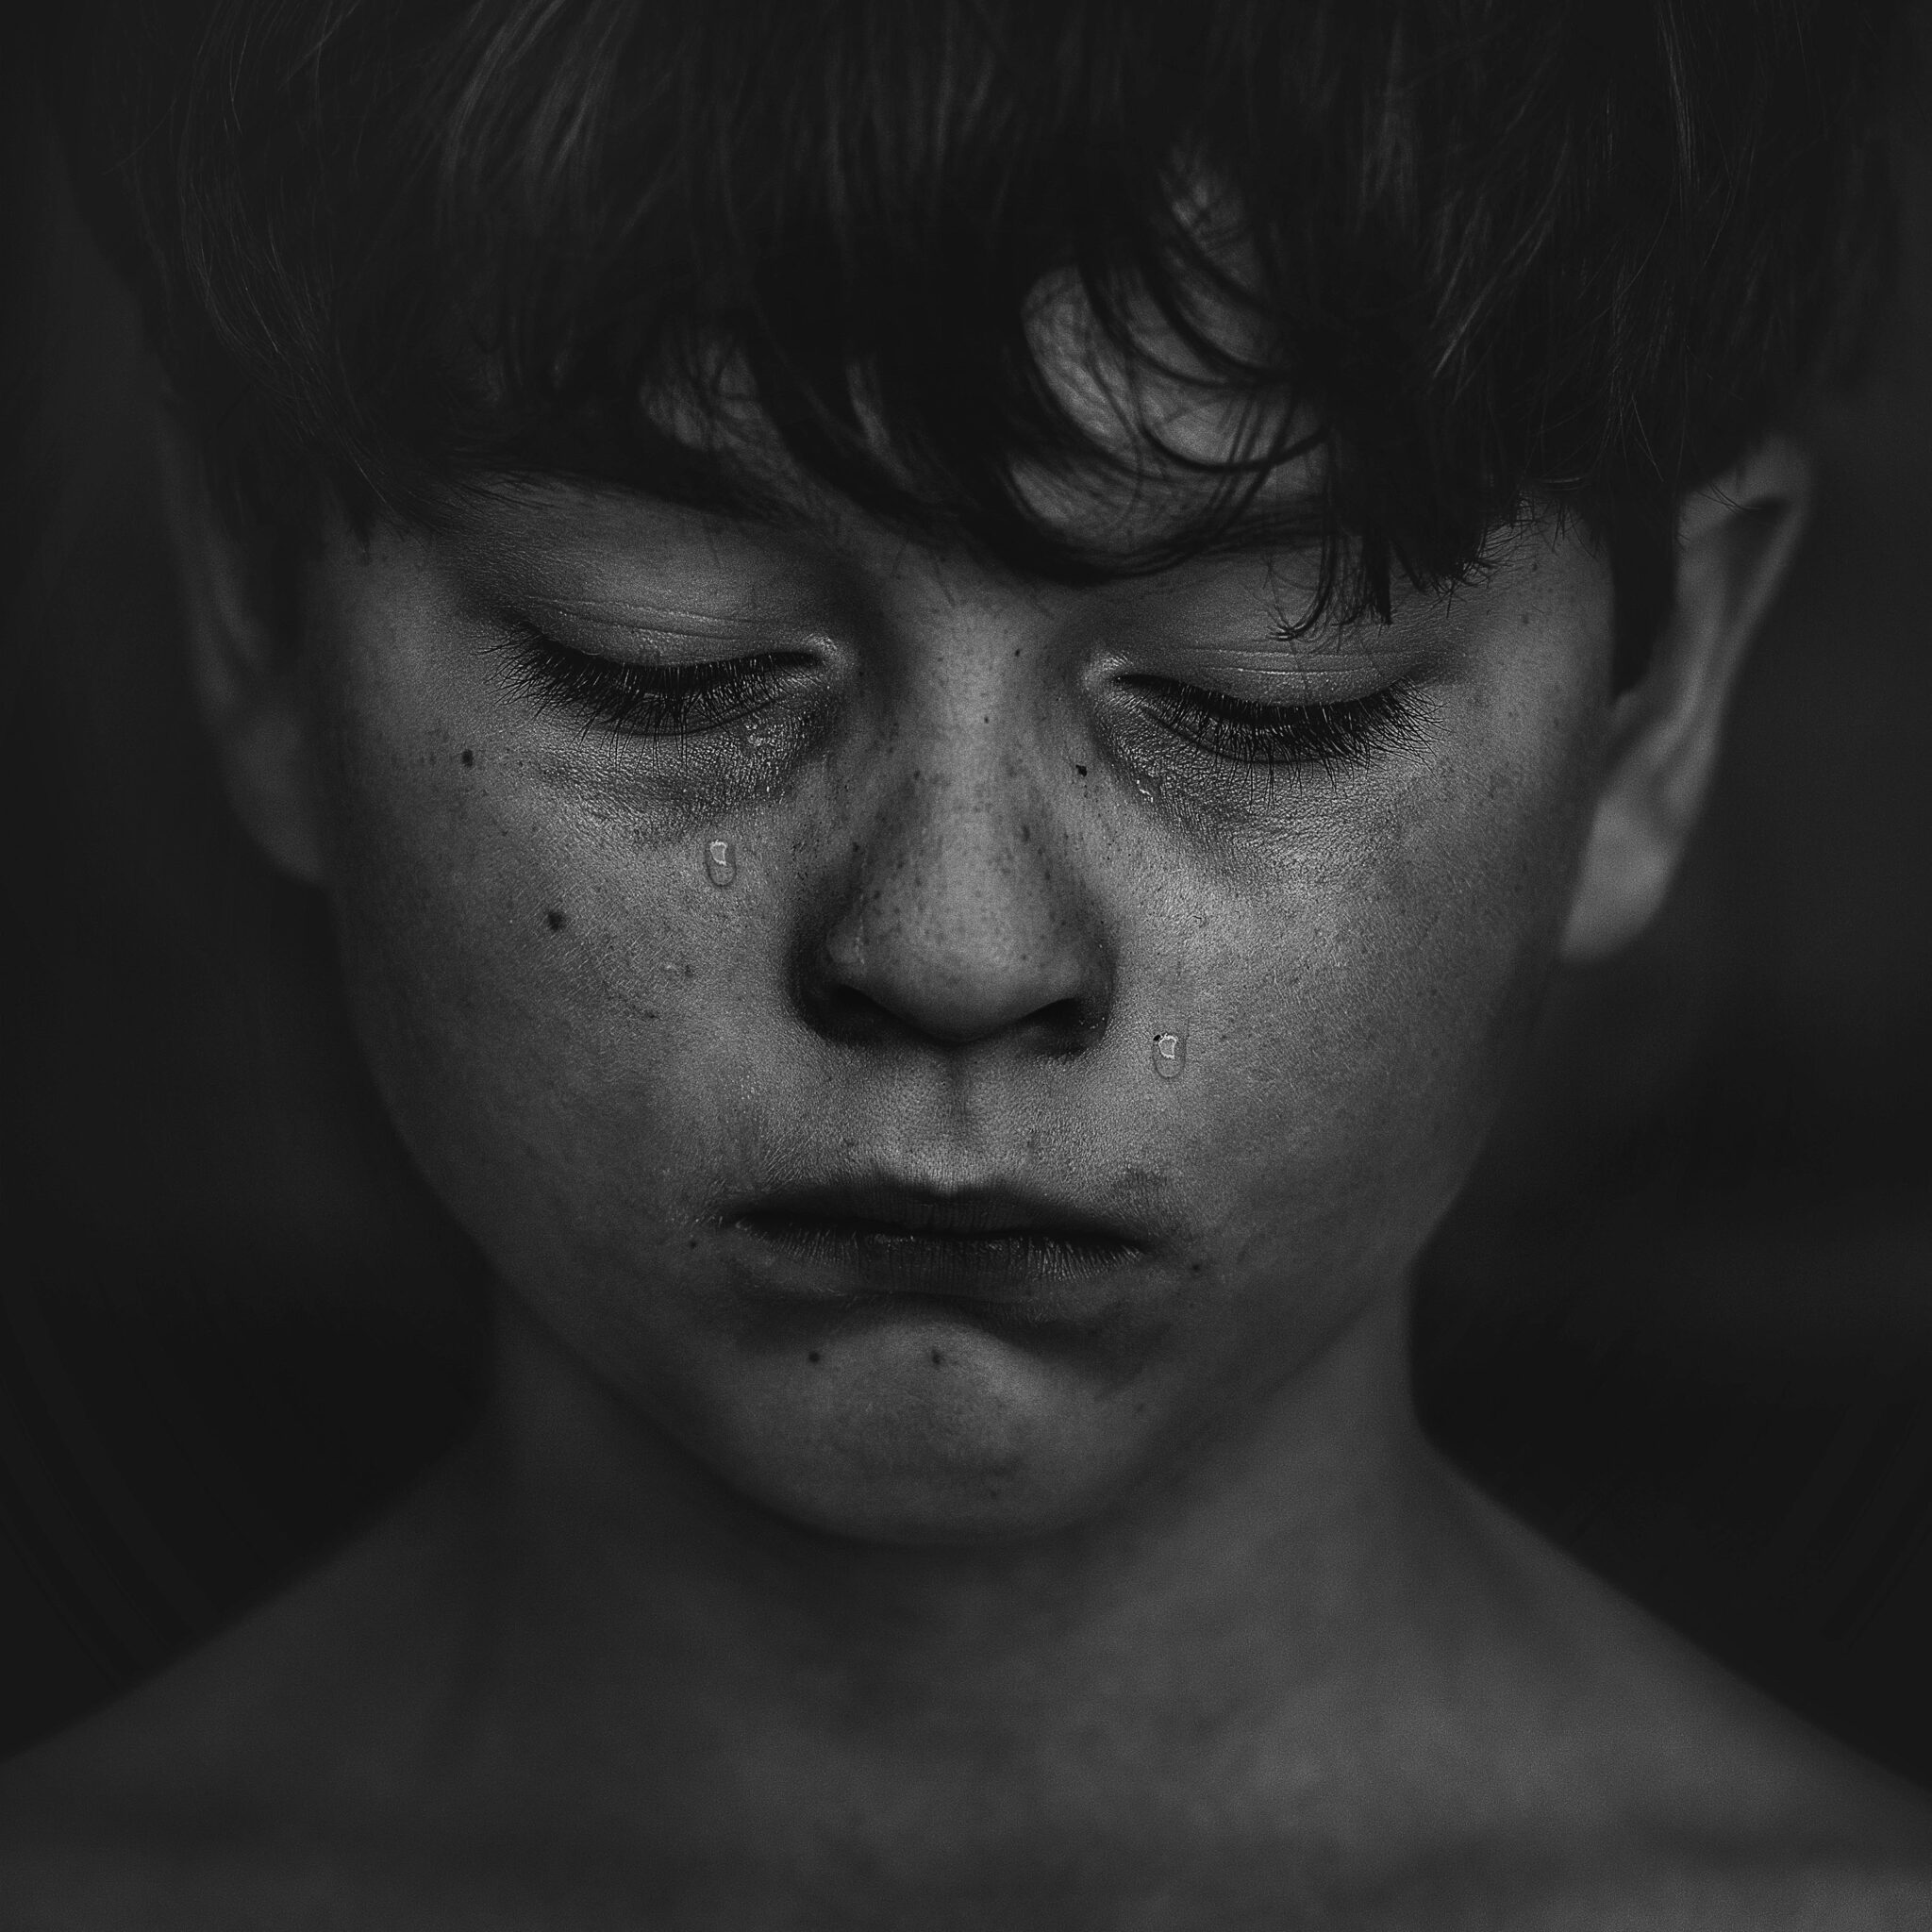 boy crying in black and white